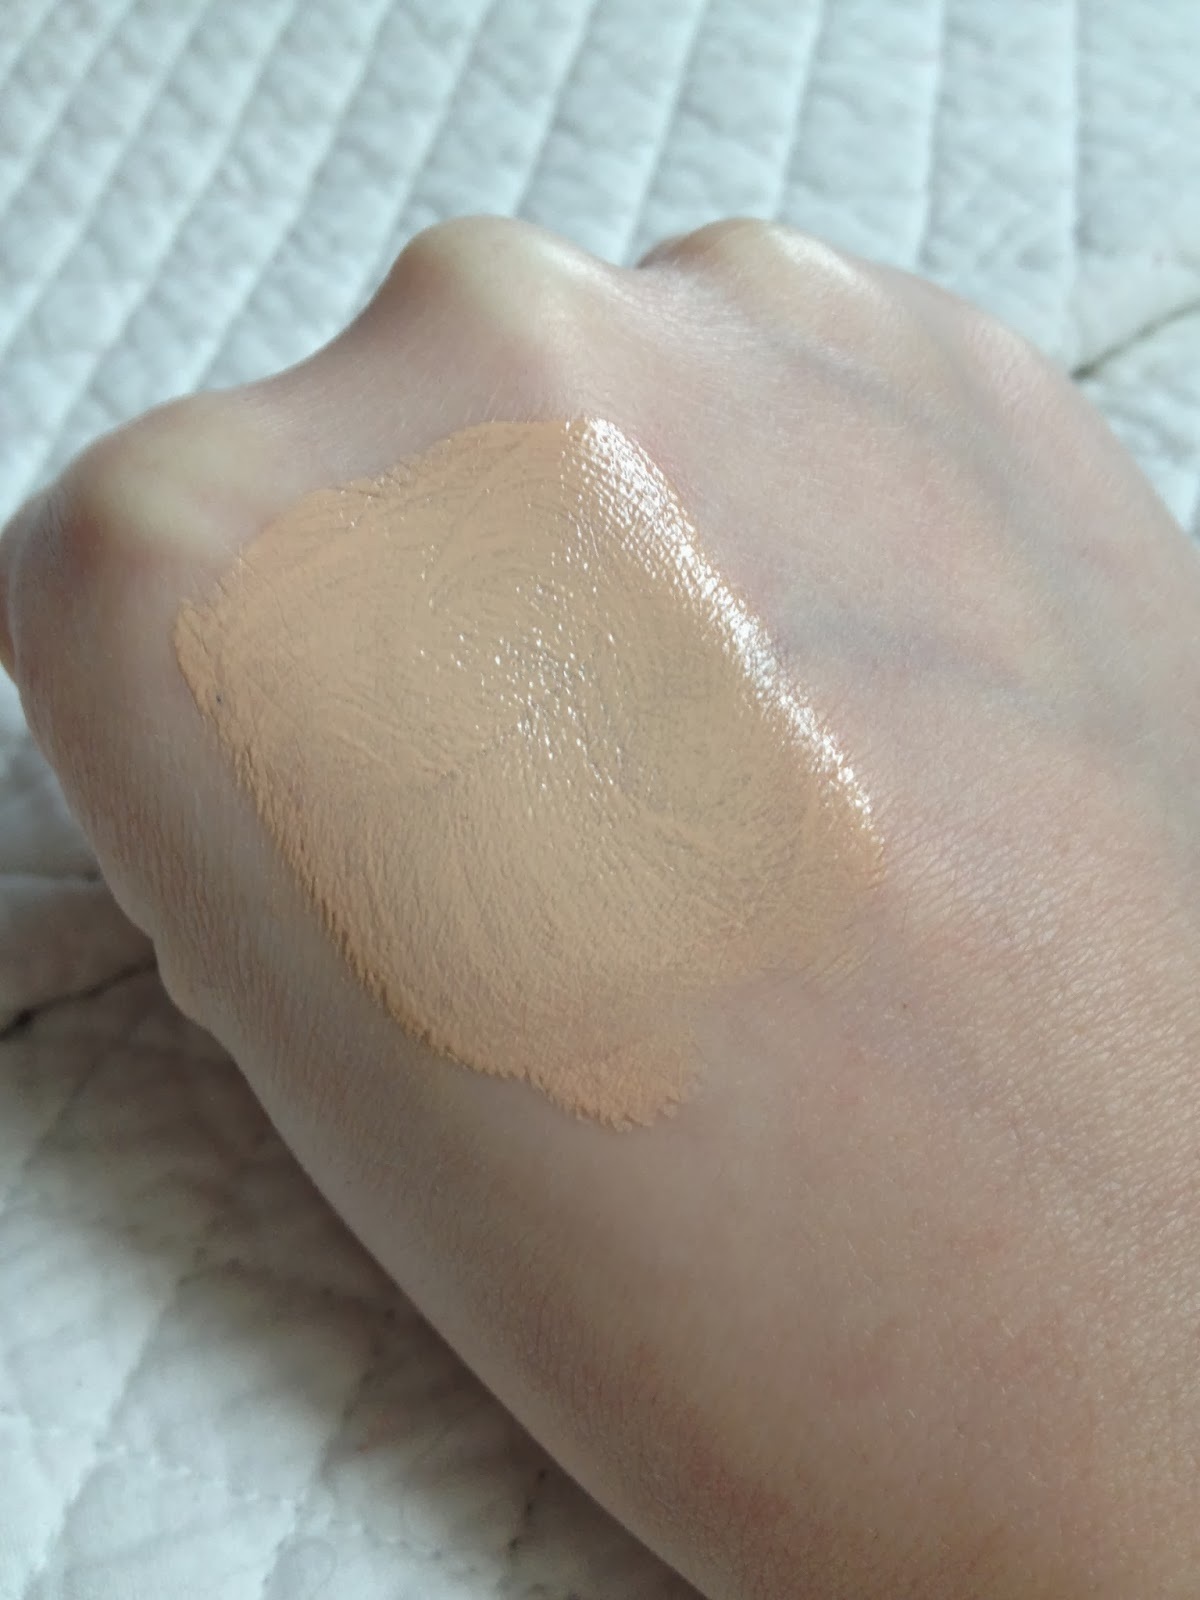 dior capture totale foundation review